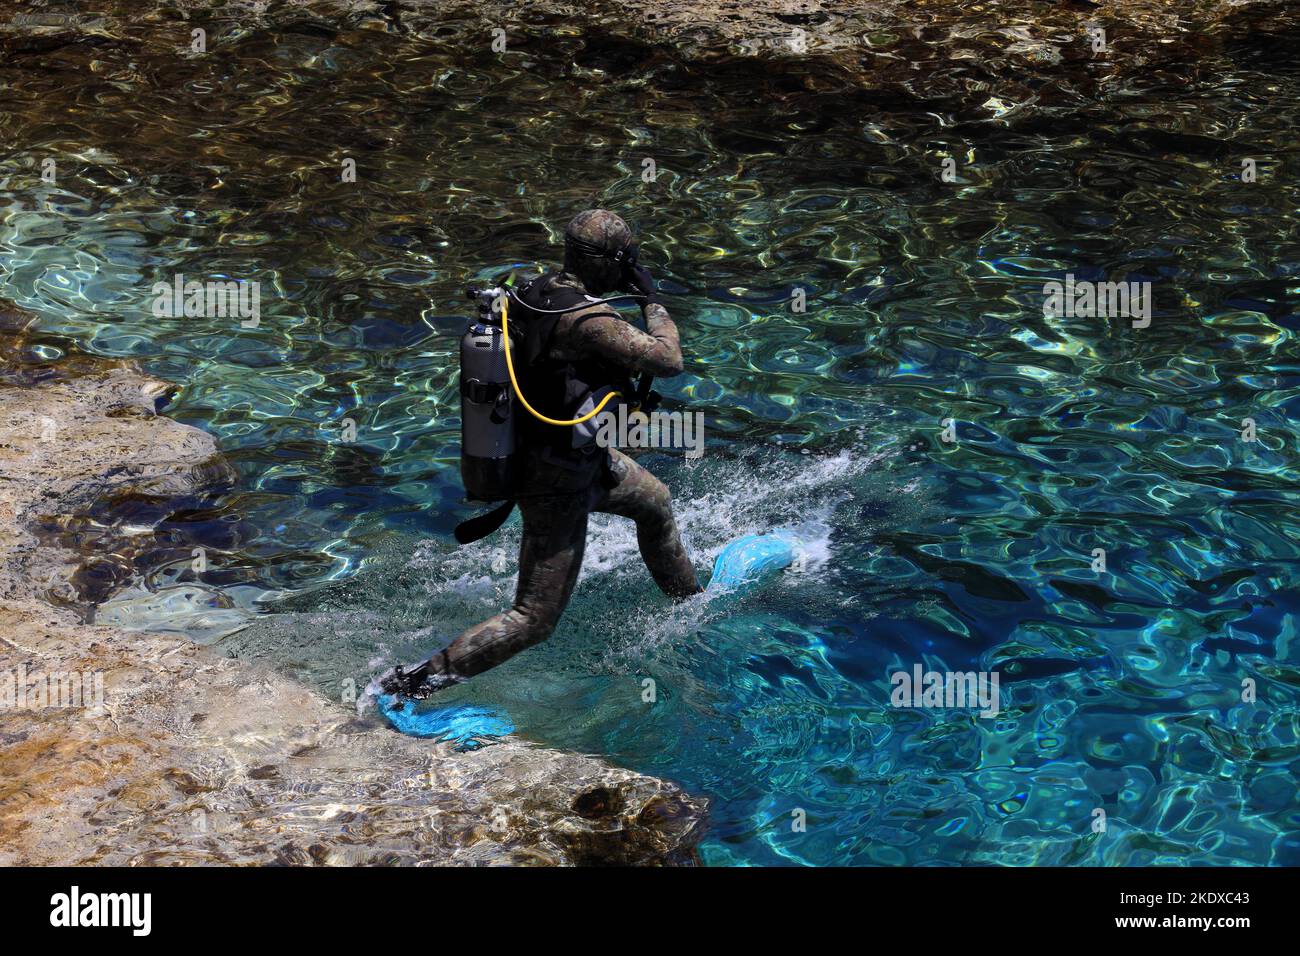 May 29, 2022, Larnaca, Cyprus: A scuba diver jumps into the blue lagoon of the Mediterranean Sea at Cape Greco National Forest Park at the southern end of Famagusta Bay and forms part of Ayia Napa Municipality. The Republic of Cyprus stands at a historic and cultural crossroads between Europe and Asia. Its chief cities-the capital of Nicosia, Limassol, Famagusta, and Paphos have absorbed the influences of generations of conquerors, pilgrims, and travelers and have an air that is both cosmopolitan and provincial. Today Cyprus is a popular tourist destination for visitors from Europe, favored by Stock Photo